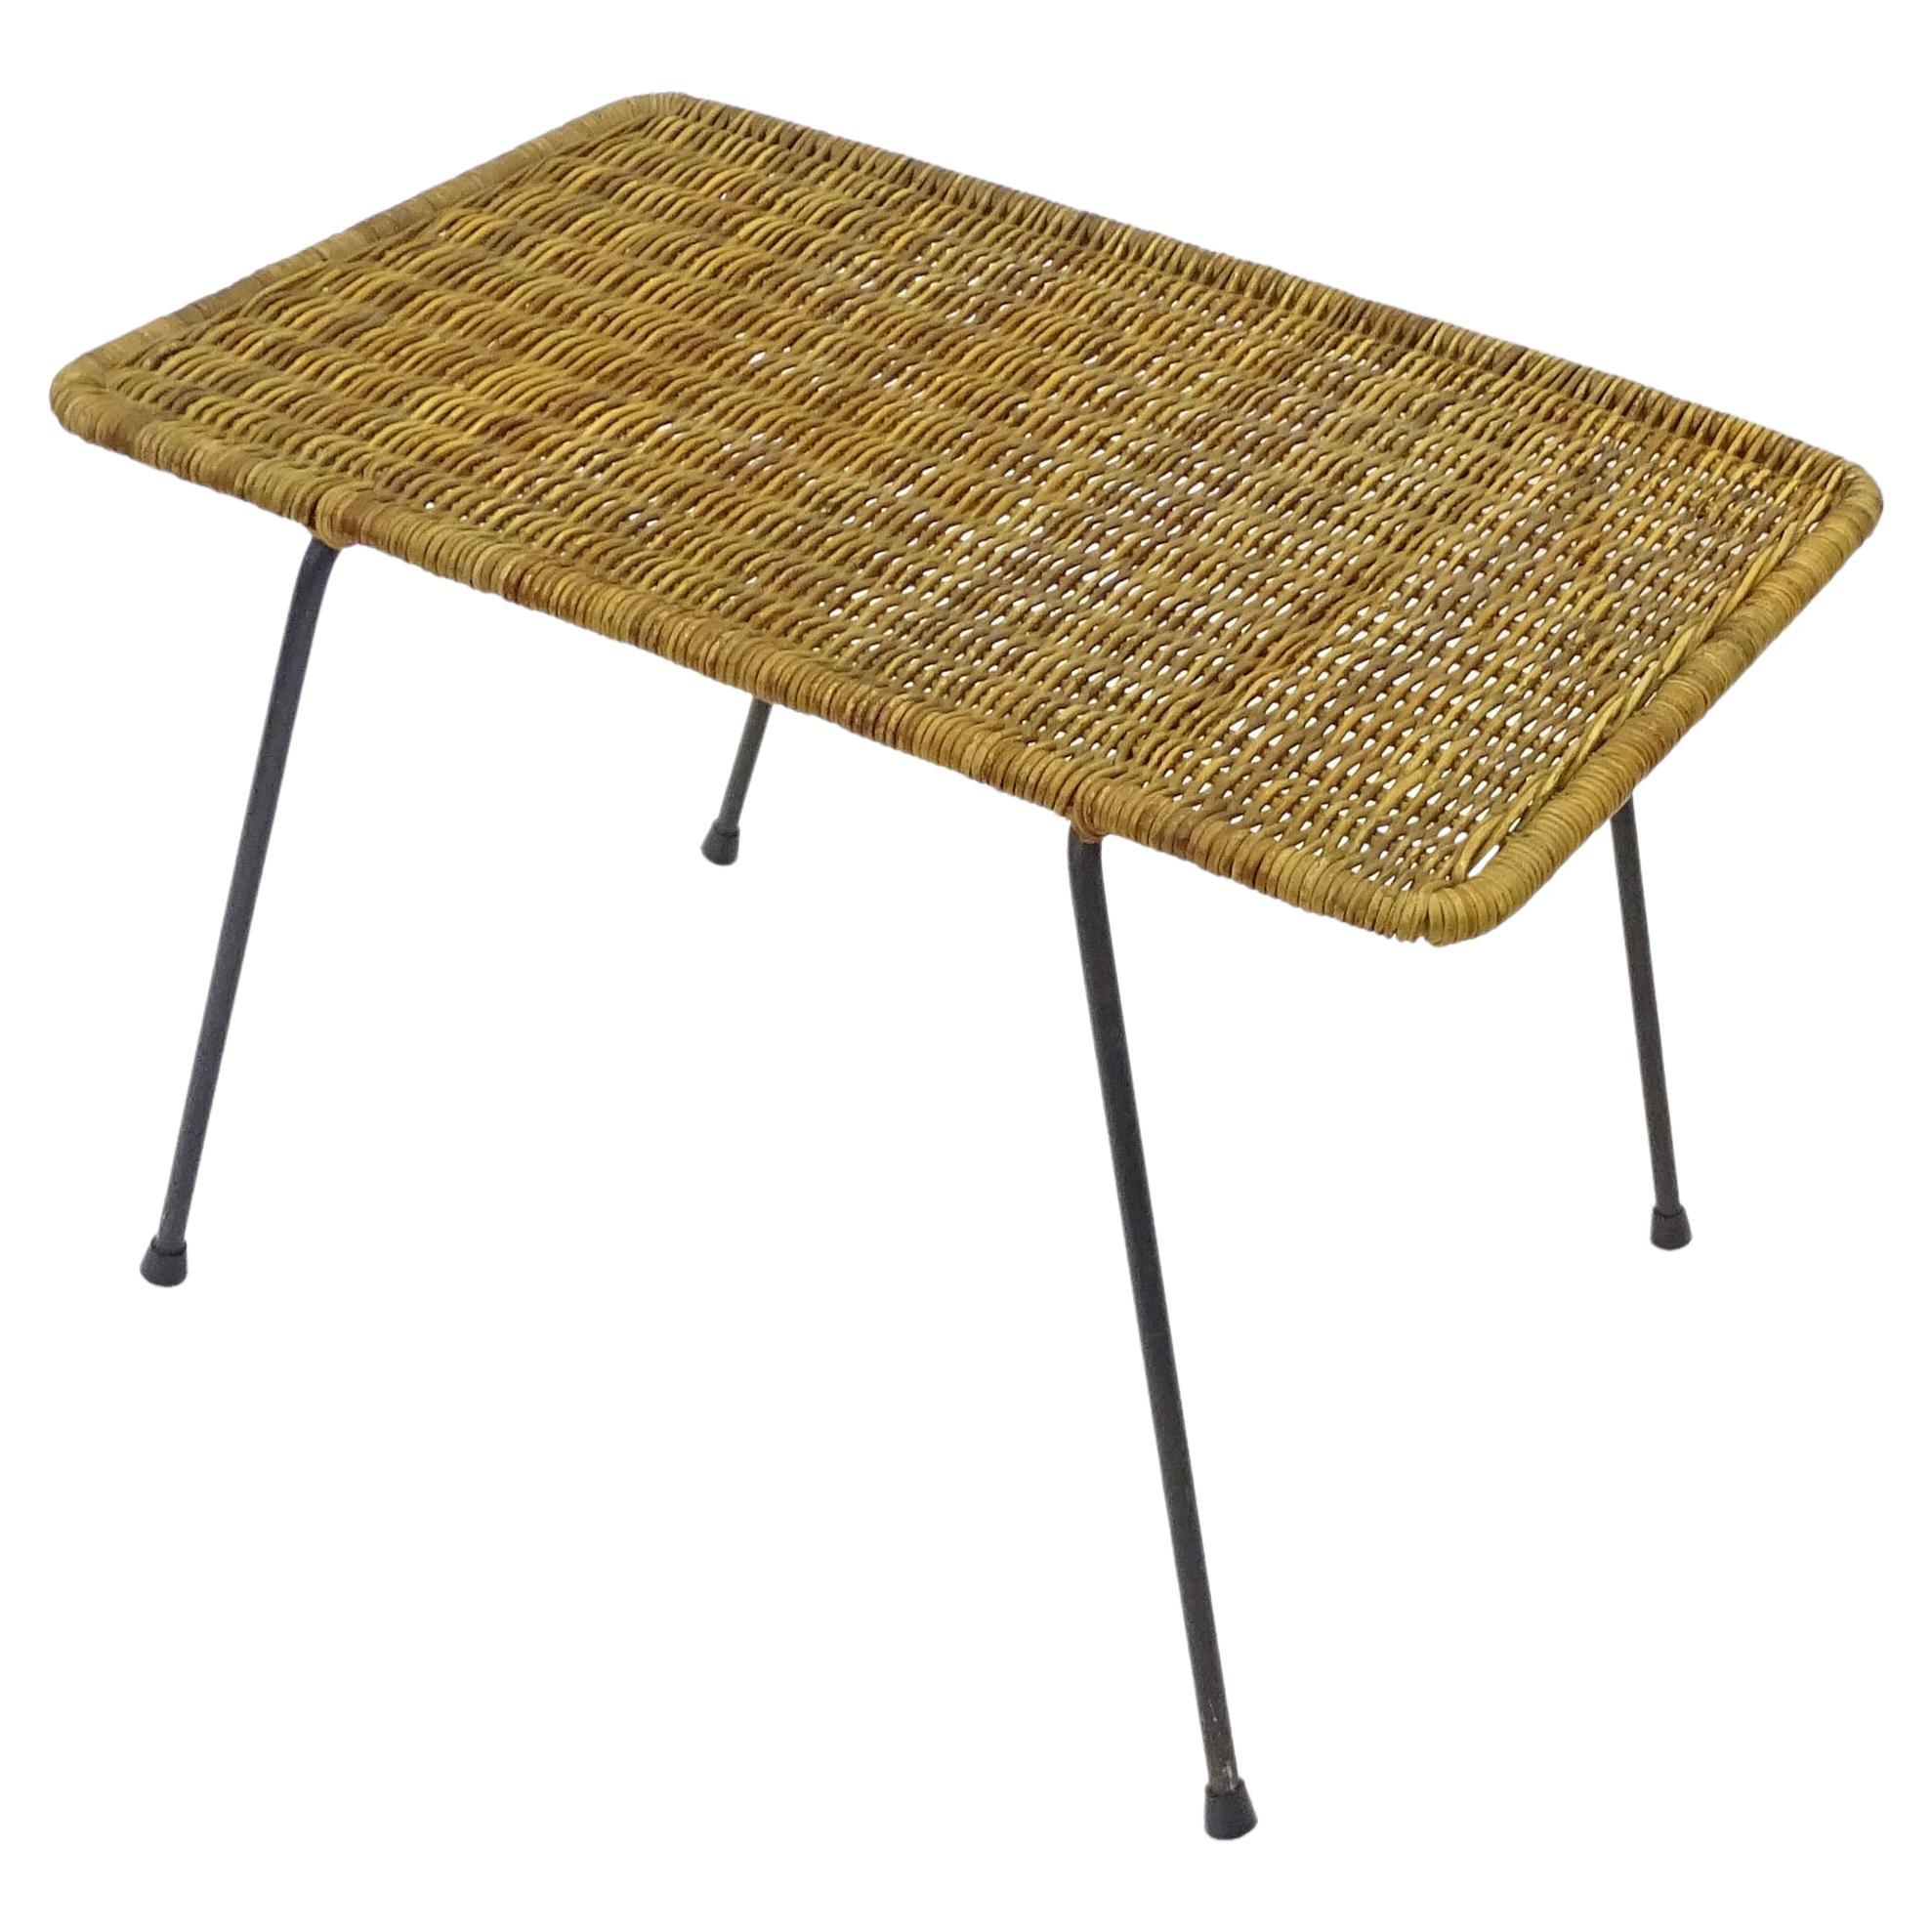 Italian 1950s Wicker and Metal Coffee Table For Sale